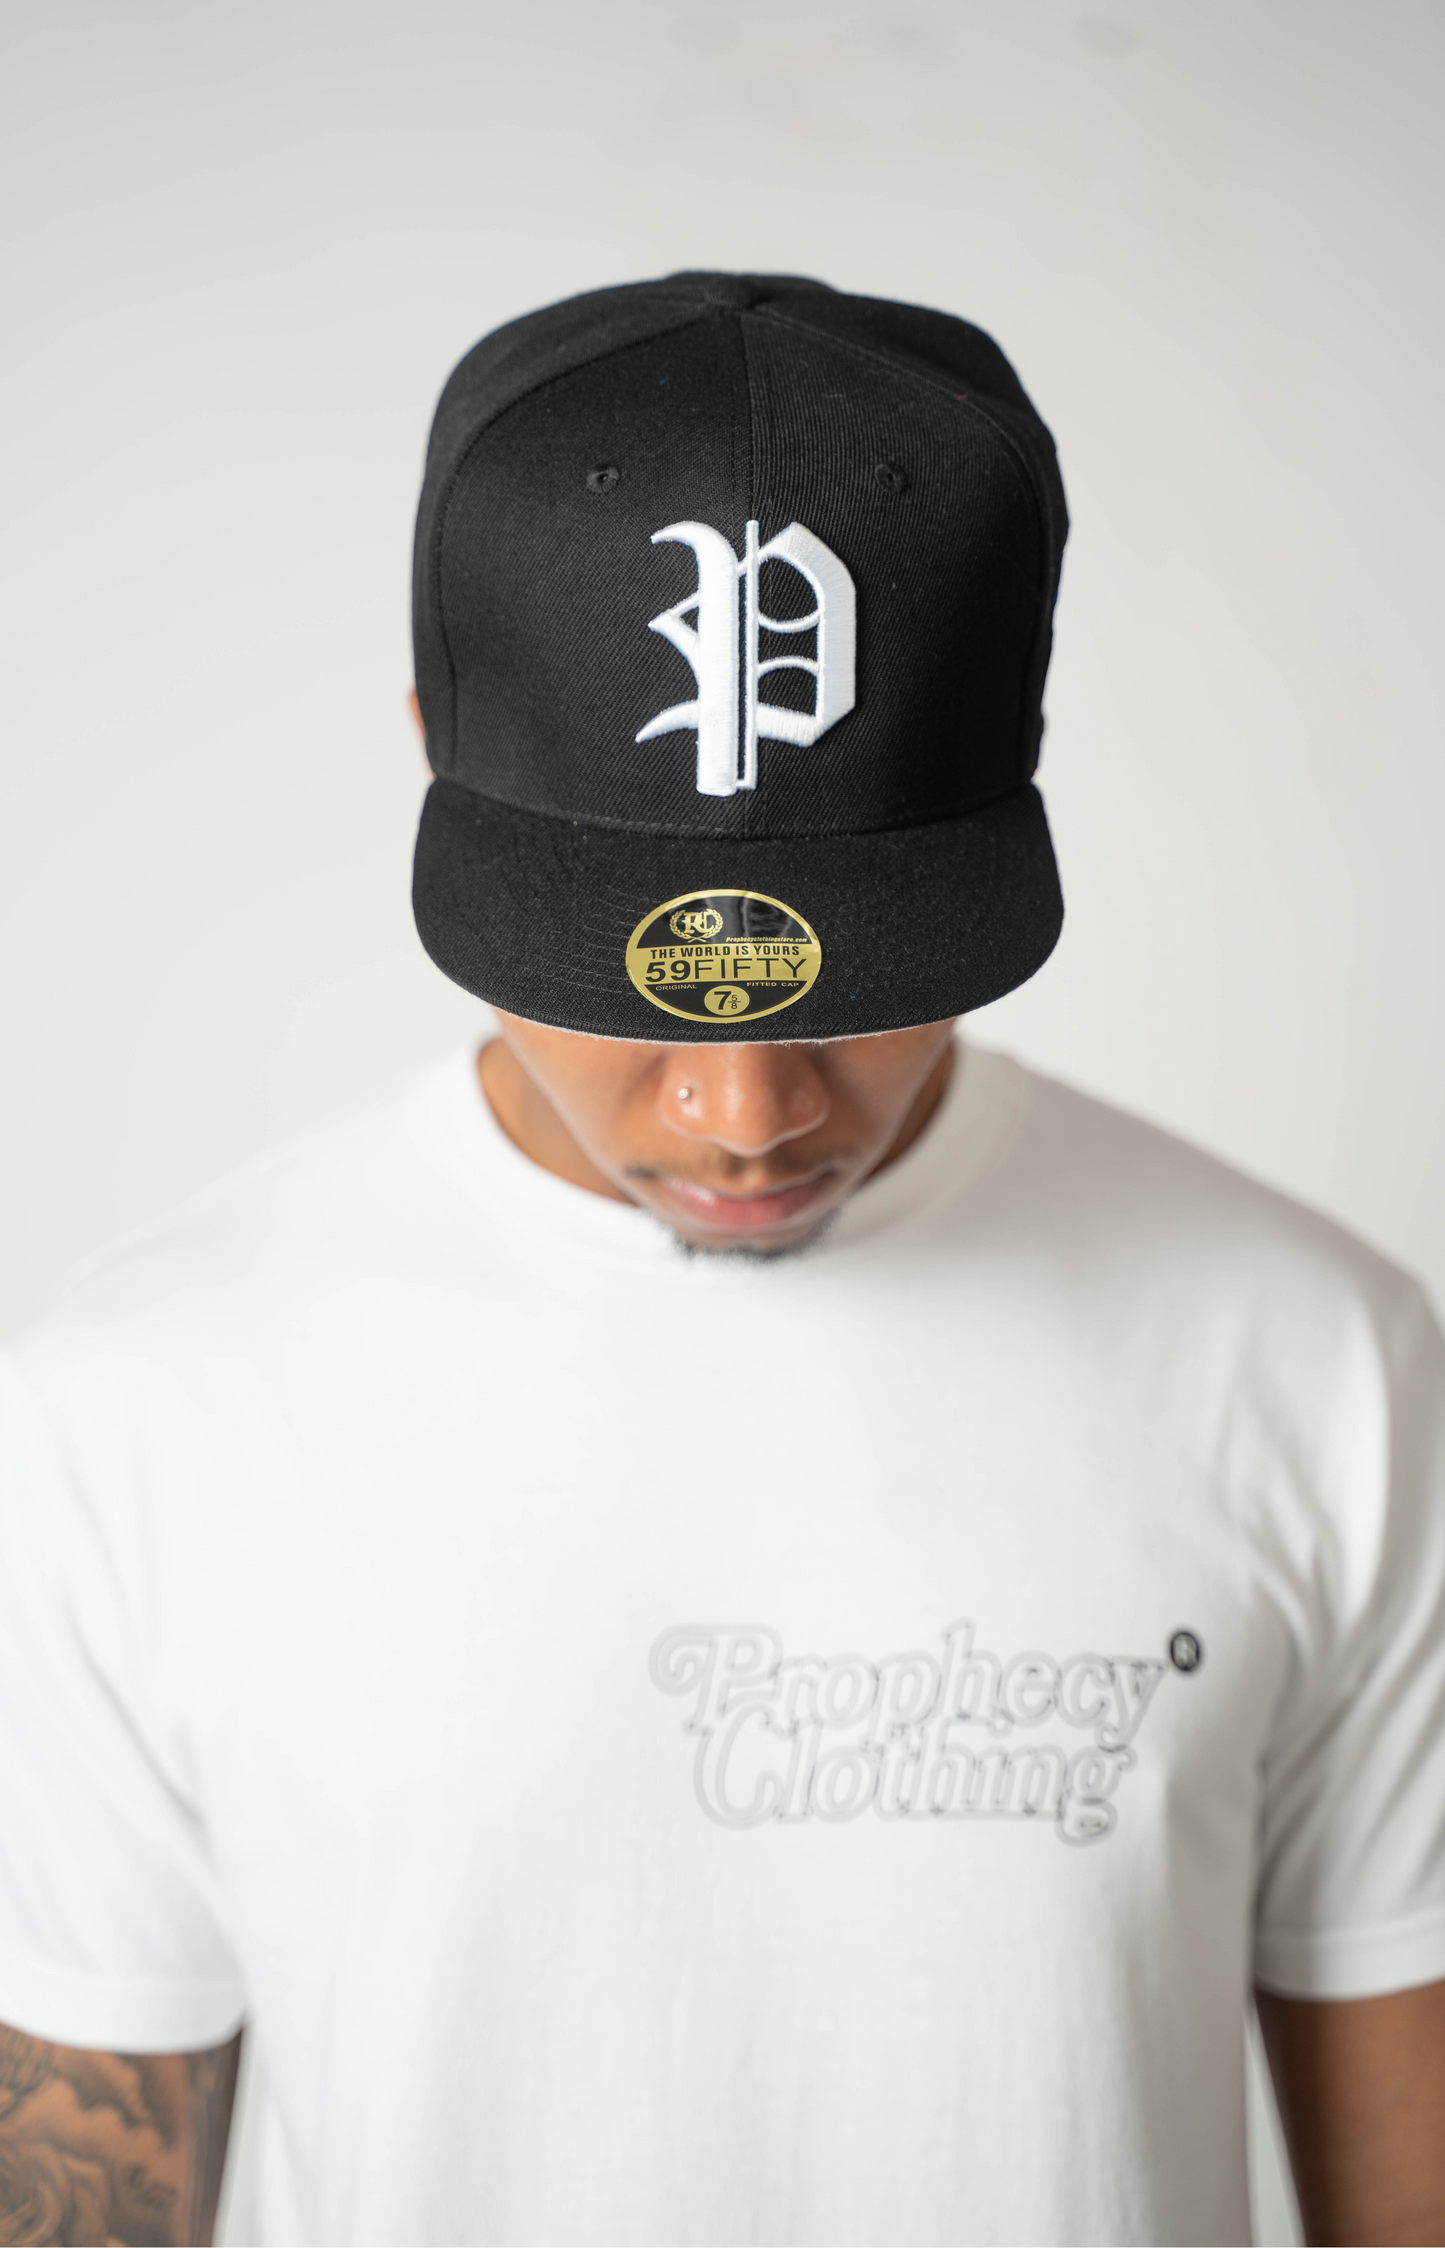 black and white fitted cap